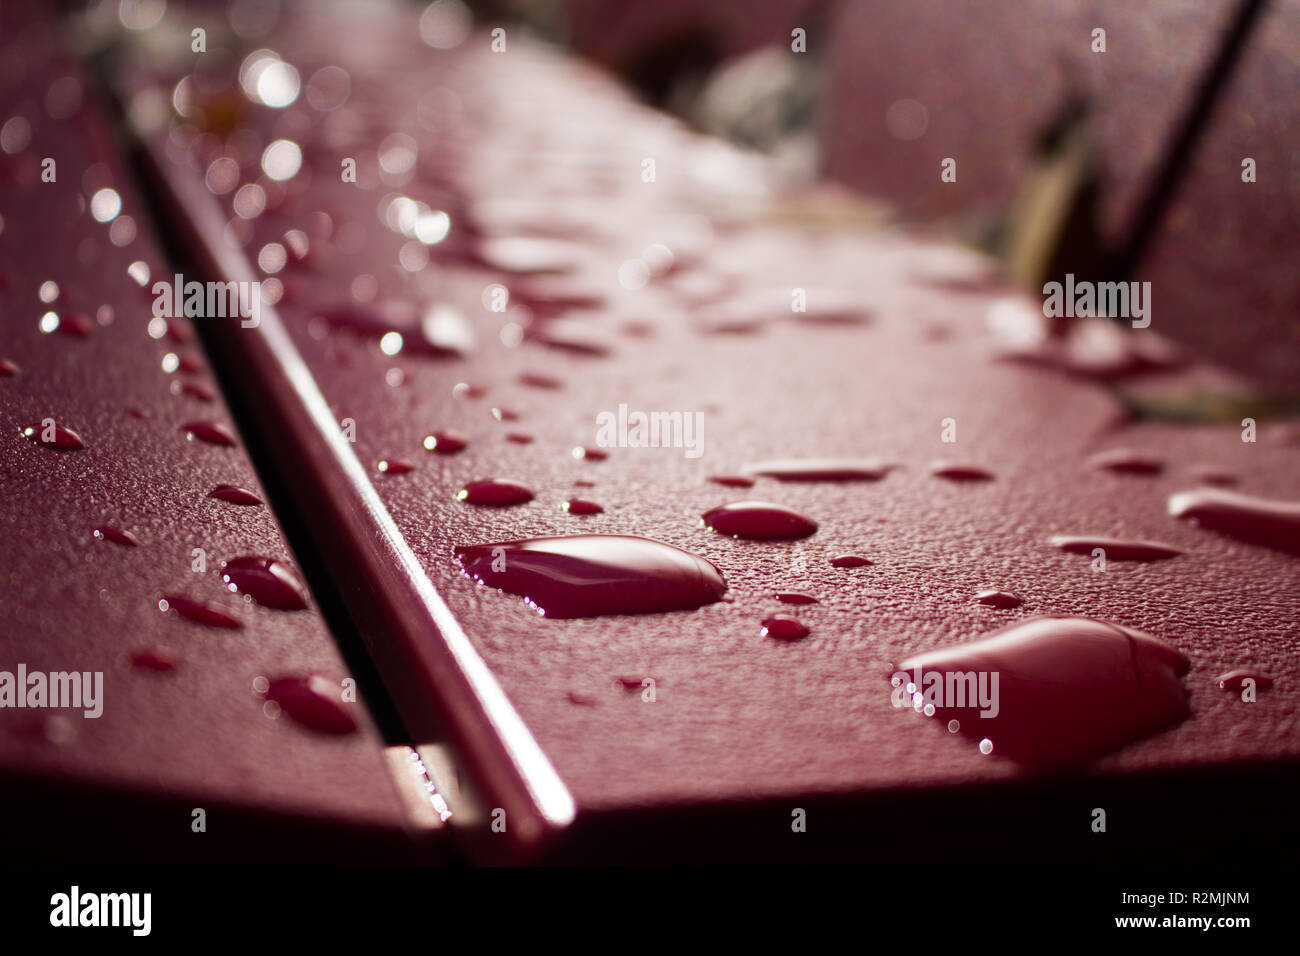 Closeup of water / rain / dew droplets on red park bench Stock Photo